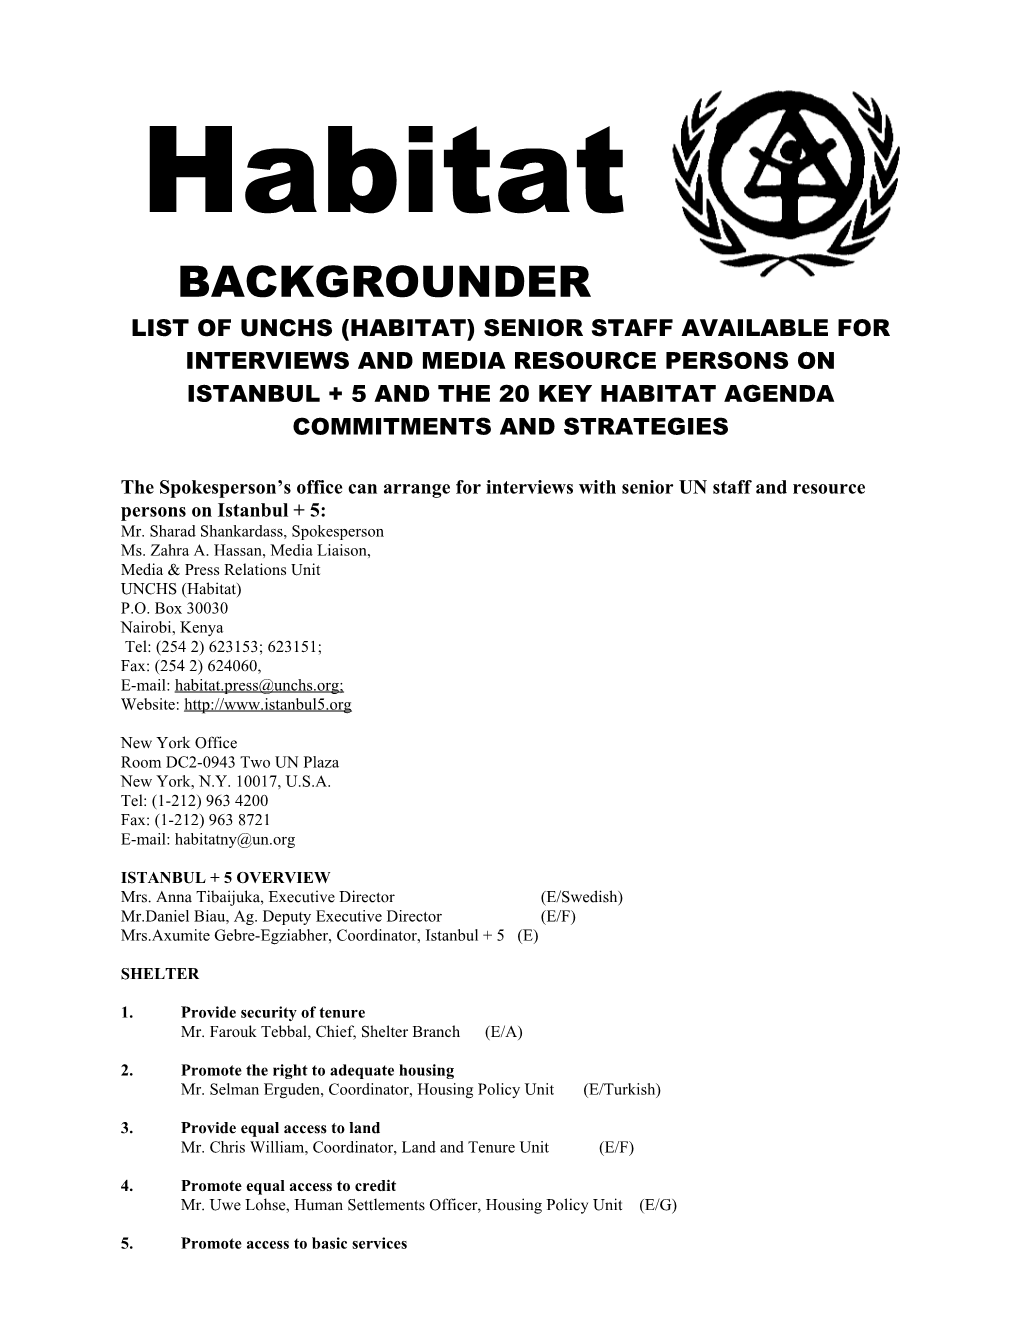 List of Unchs (Habitat) Senior Staff Available for Interviews and Media Resource Persons